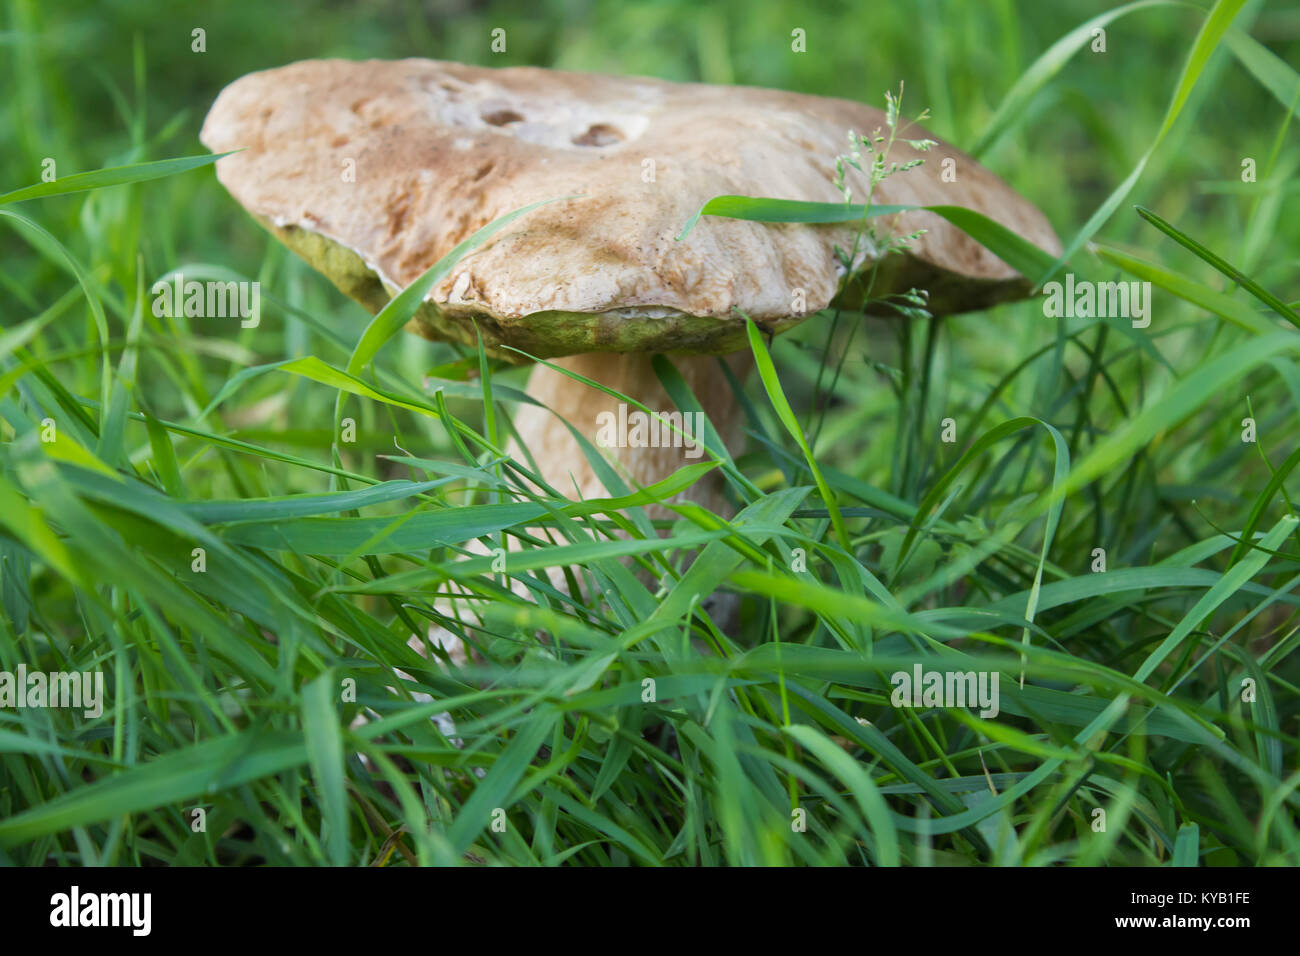 Natural porcini in the grass. Candid photos. Shallow depth of field Stock Photo